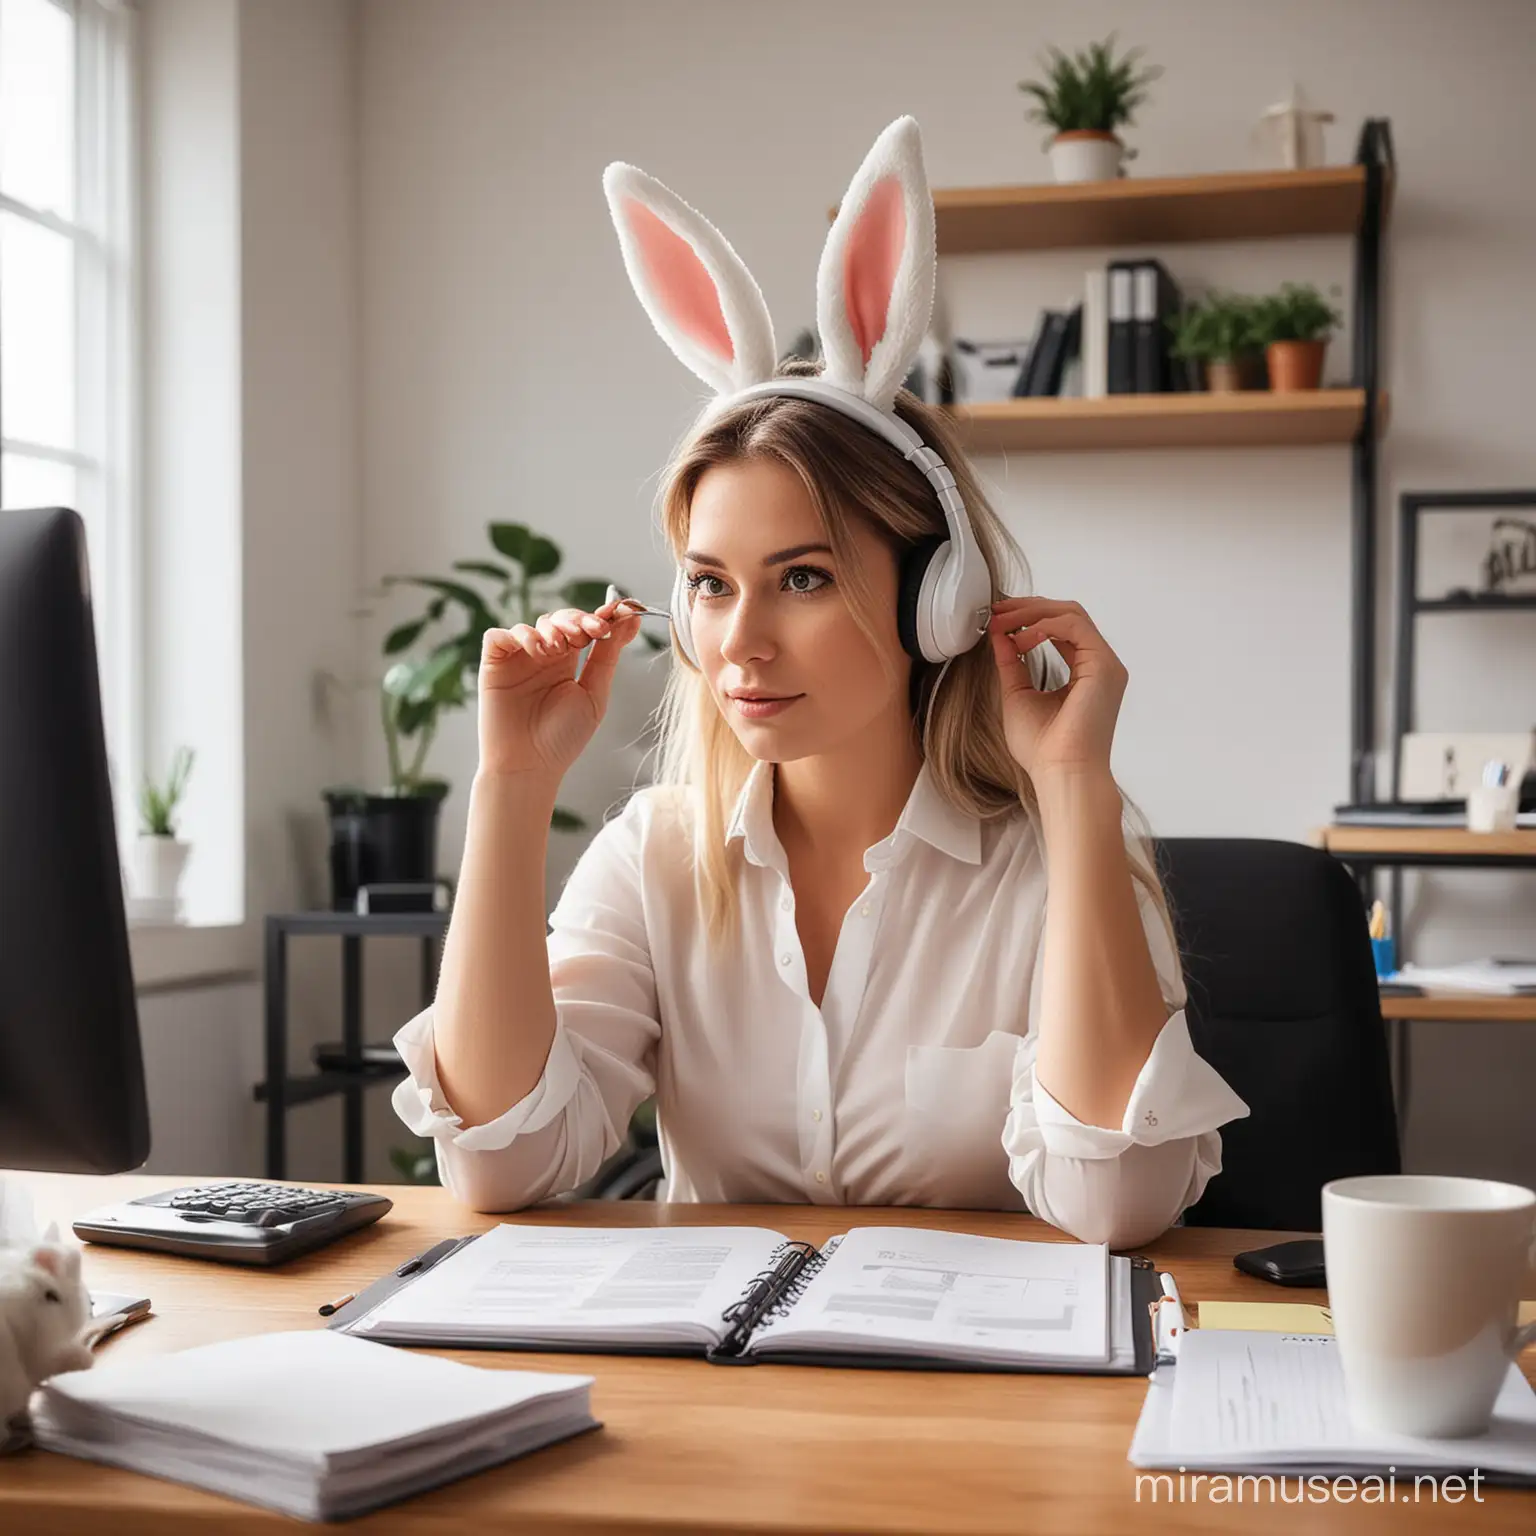 realistic view of a female entrepreneur, up to her ears in work, in office surrounding. Add a cute bunny somewhere in the picture.